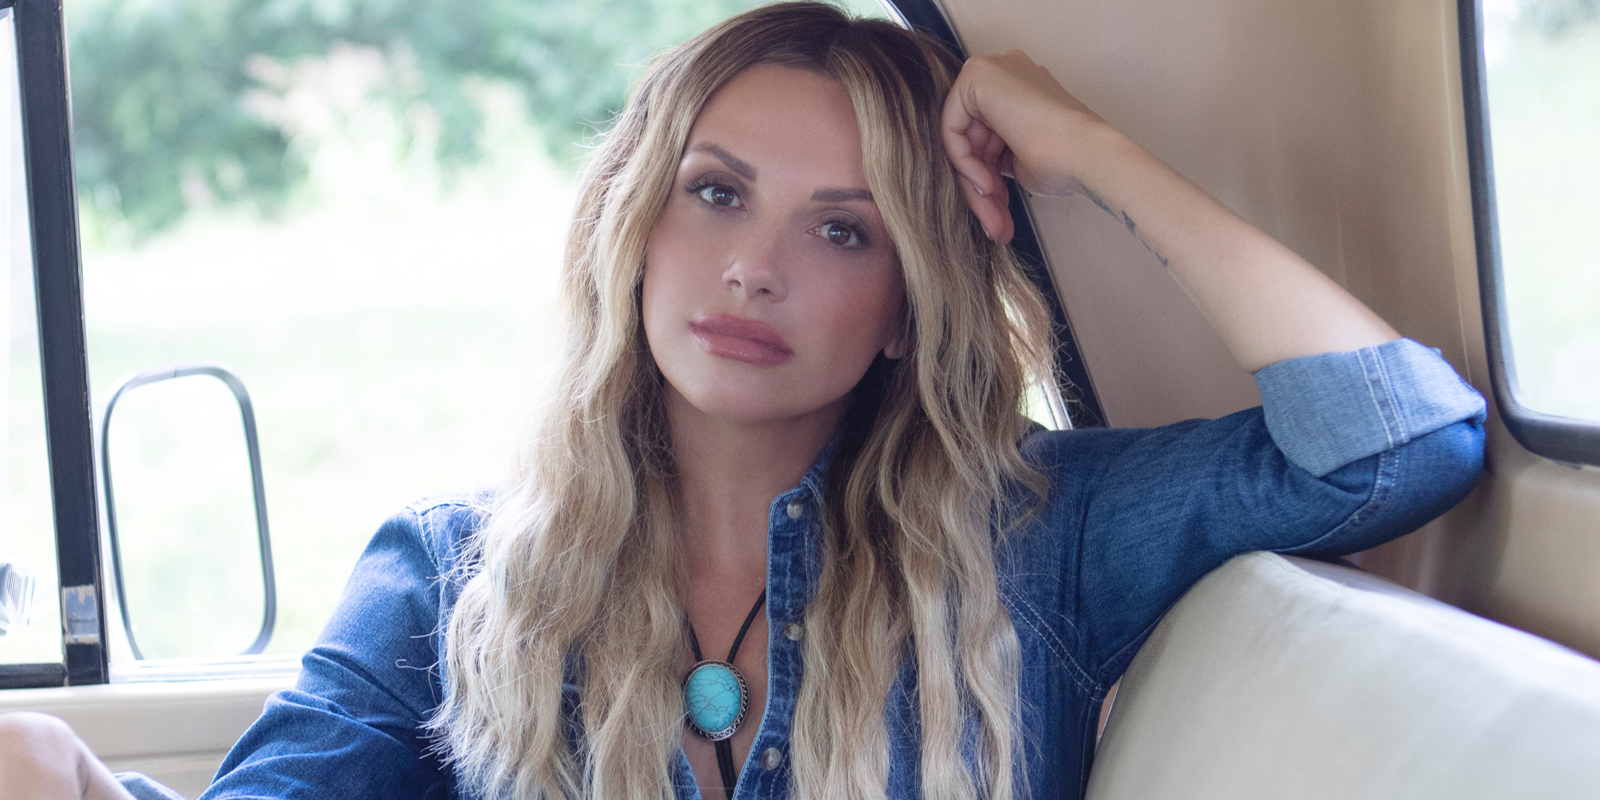 Carly Pearce Releases "Dear Miss Loretta" and Announces New Album